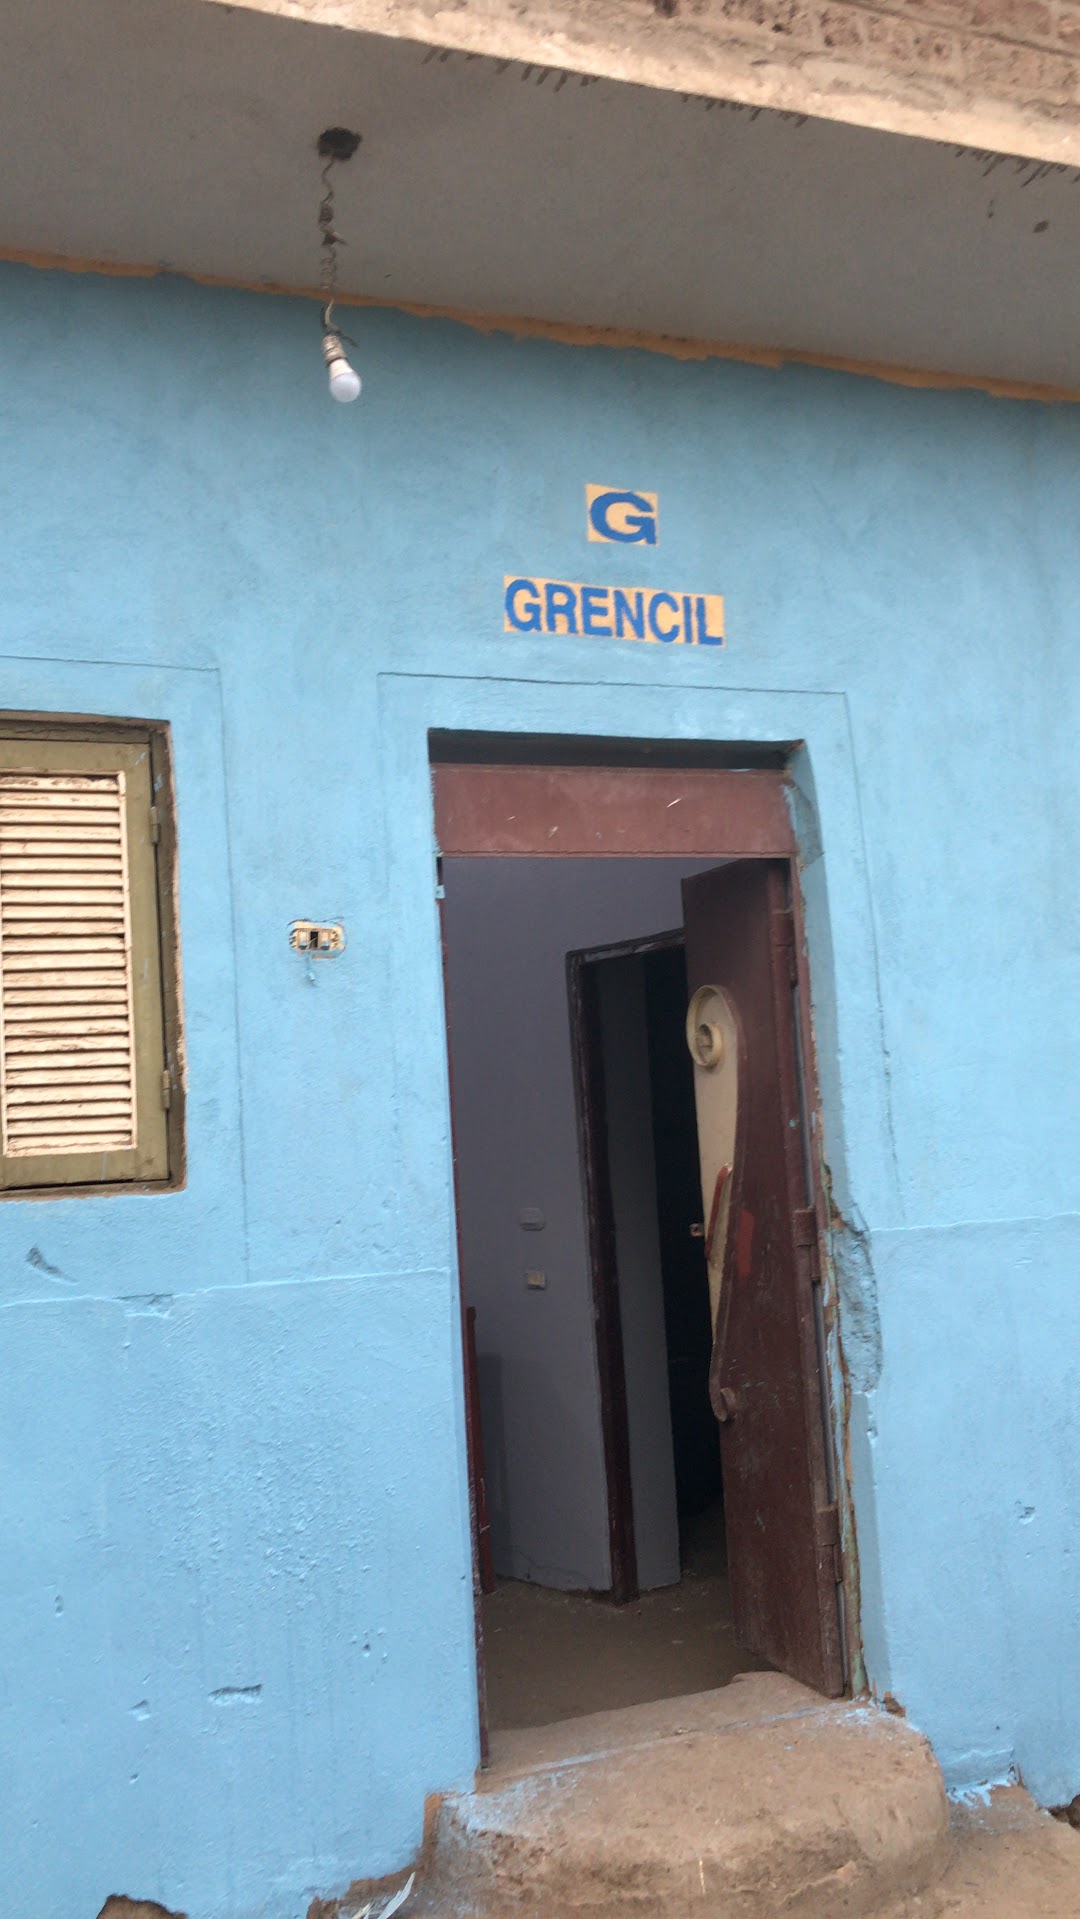 Grencil factory